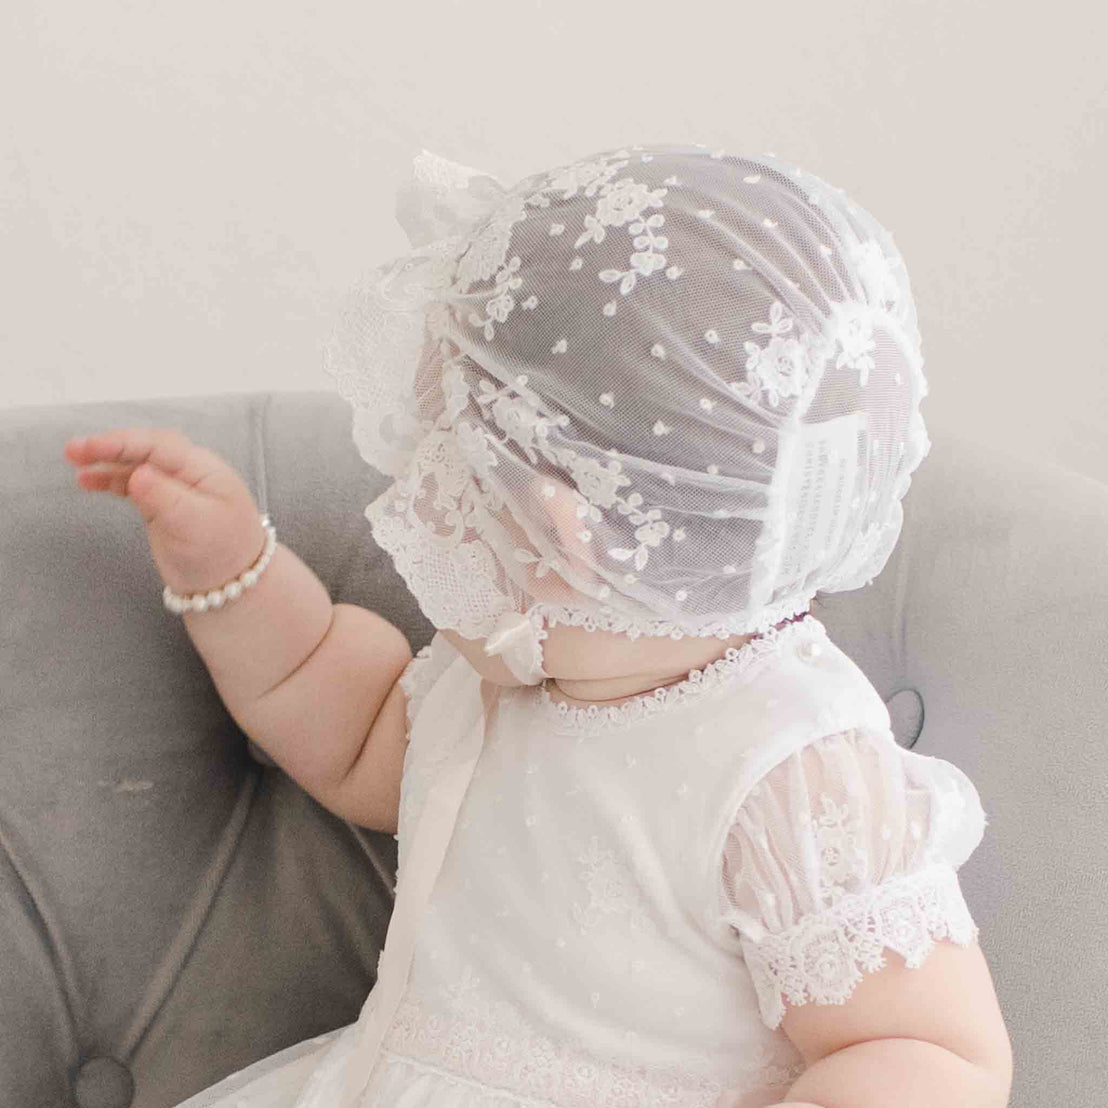 A toddler in a delicate white lace dress and matching Melissa Sheer Bonnet sits on a gray couch, playfully waving her arm. The focus is on her charming outfit, the texture of the lace.